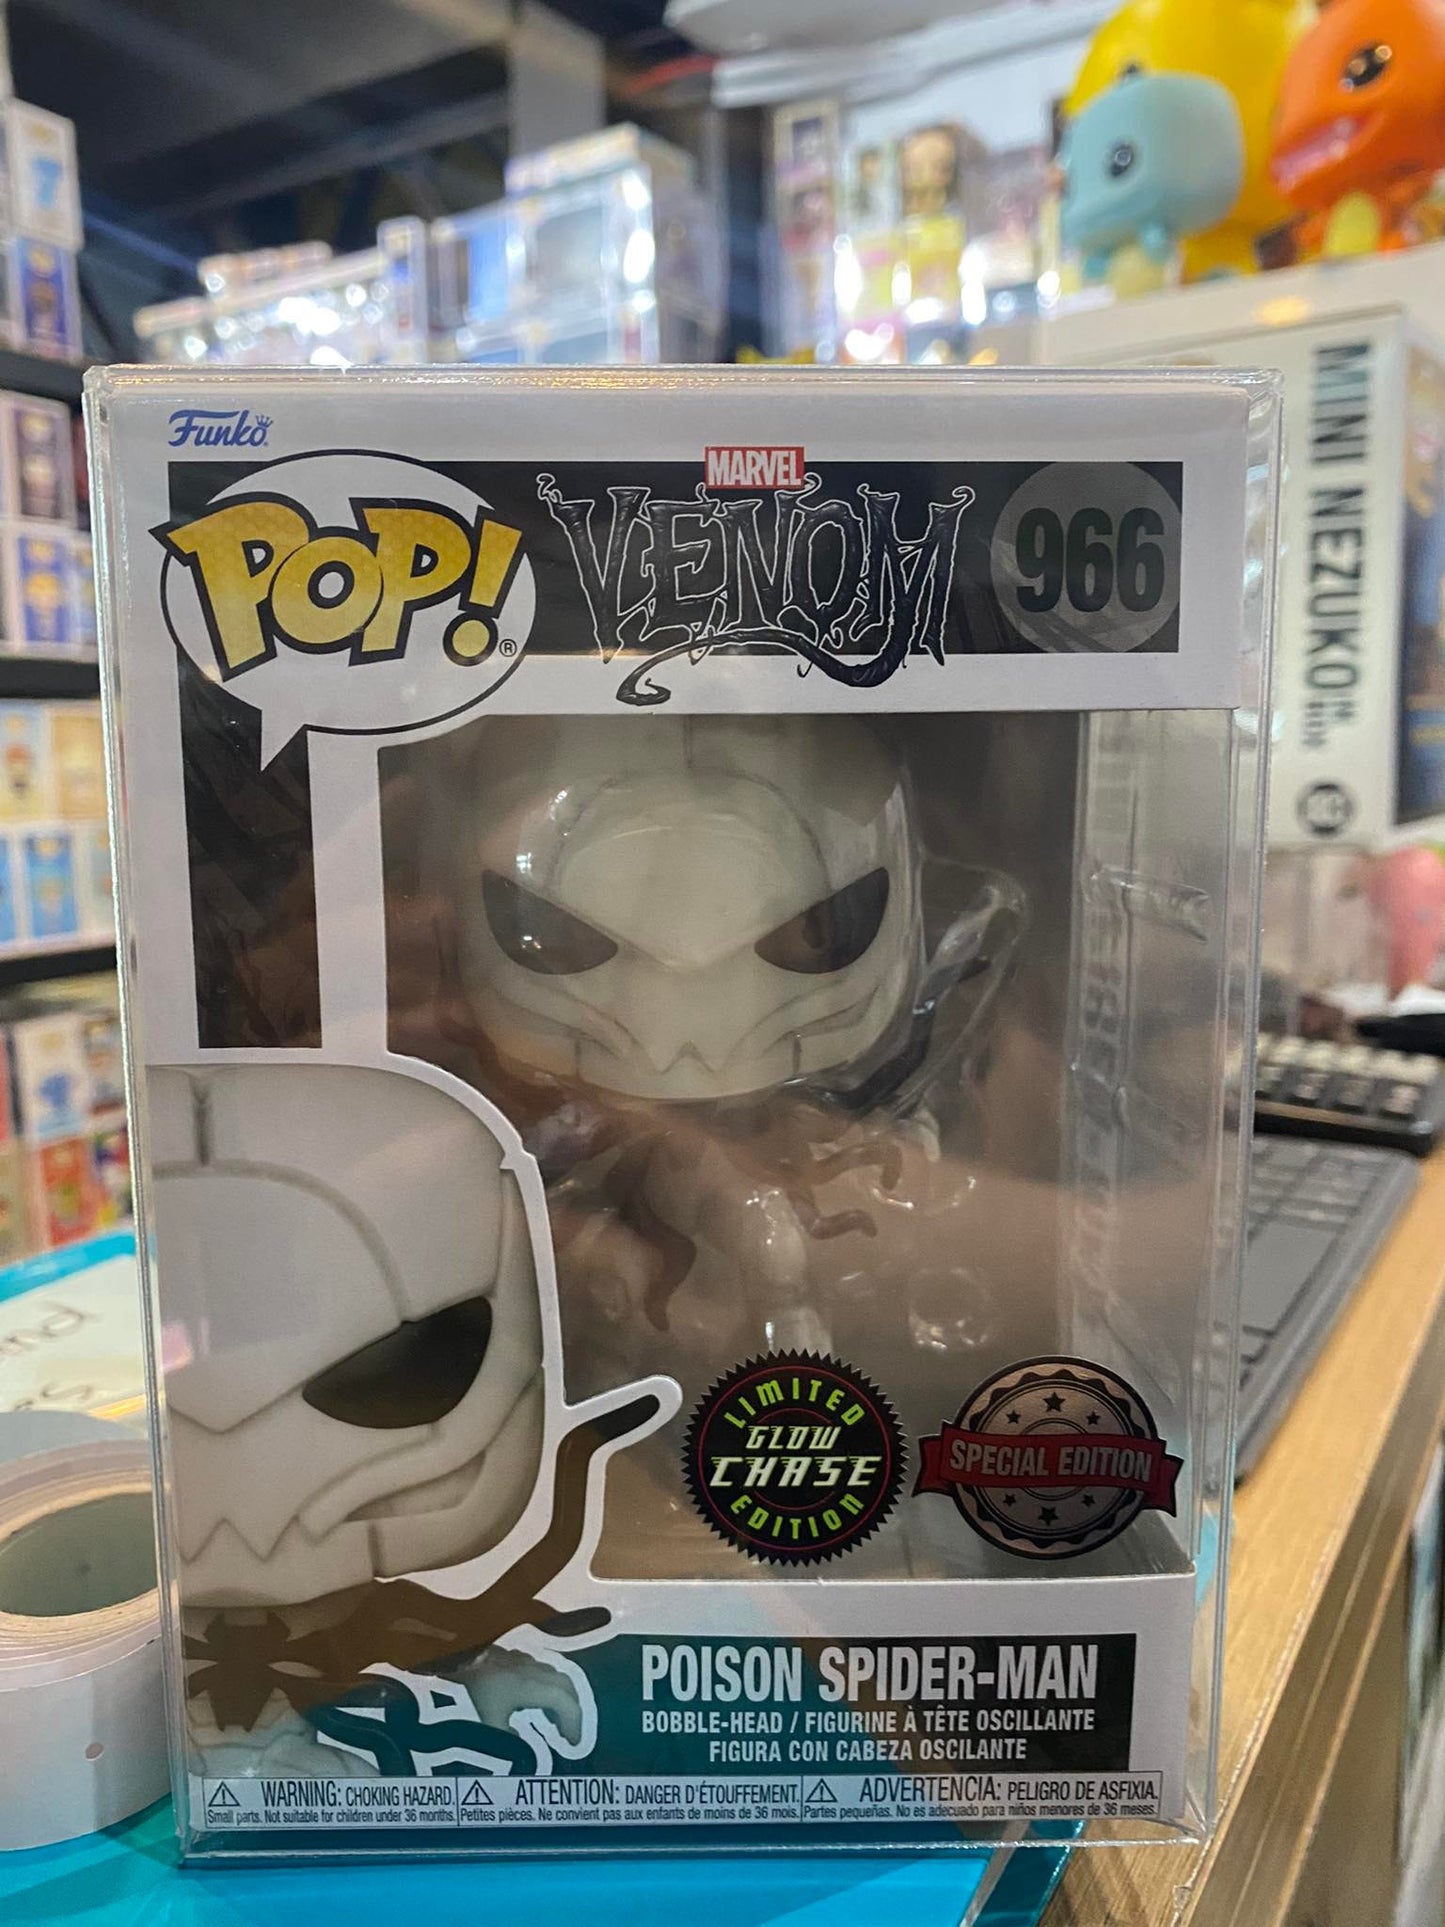 On Hand Poison Spider-Man Special Edition Chase